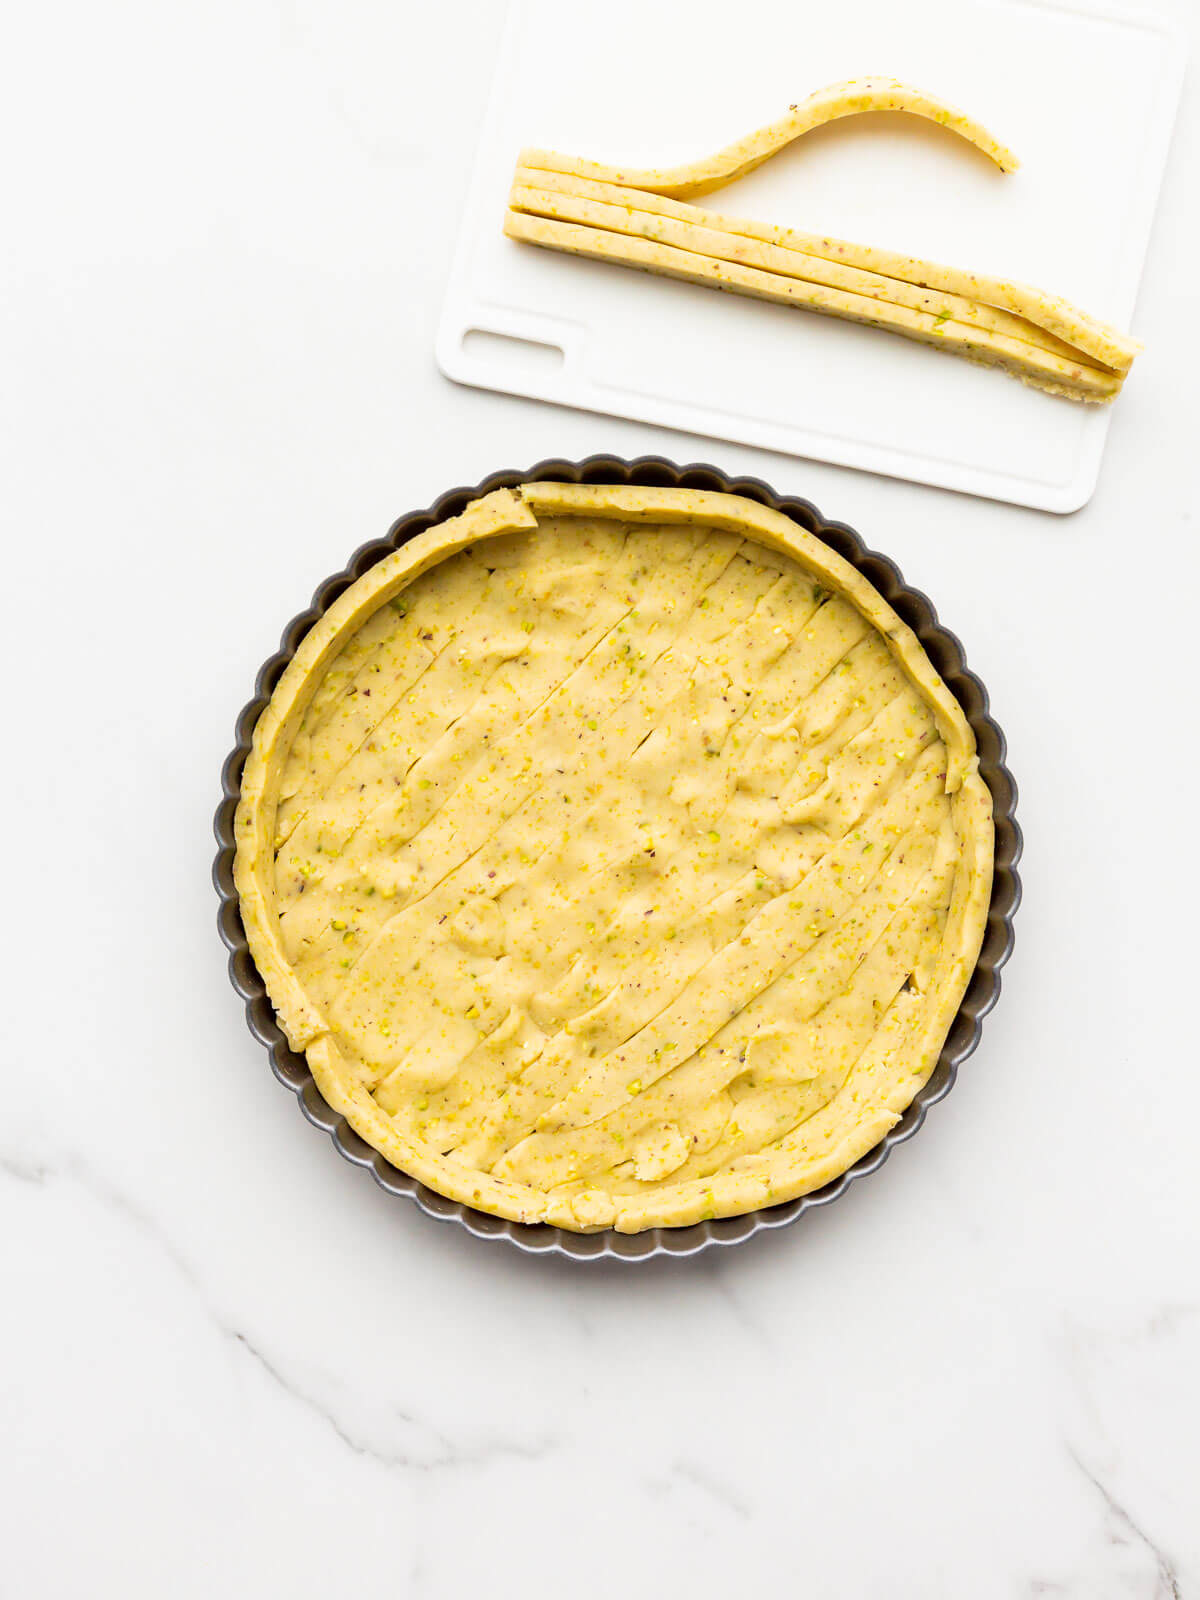 Lining tart pan with thin slices of unbaked sweet dough to make a pistachio tart shell.